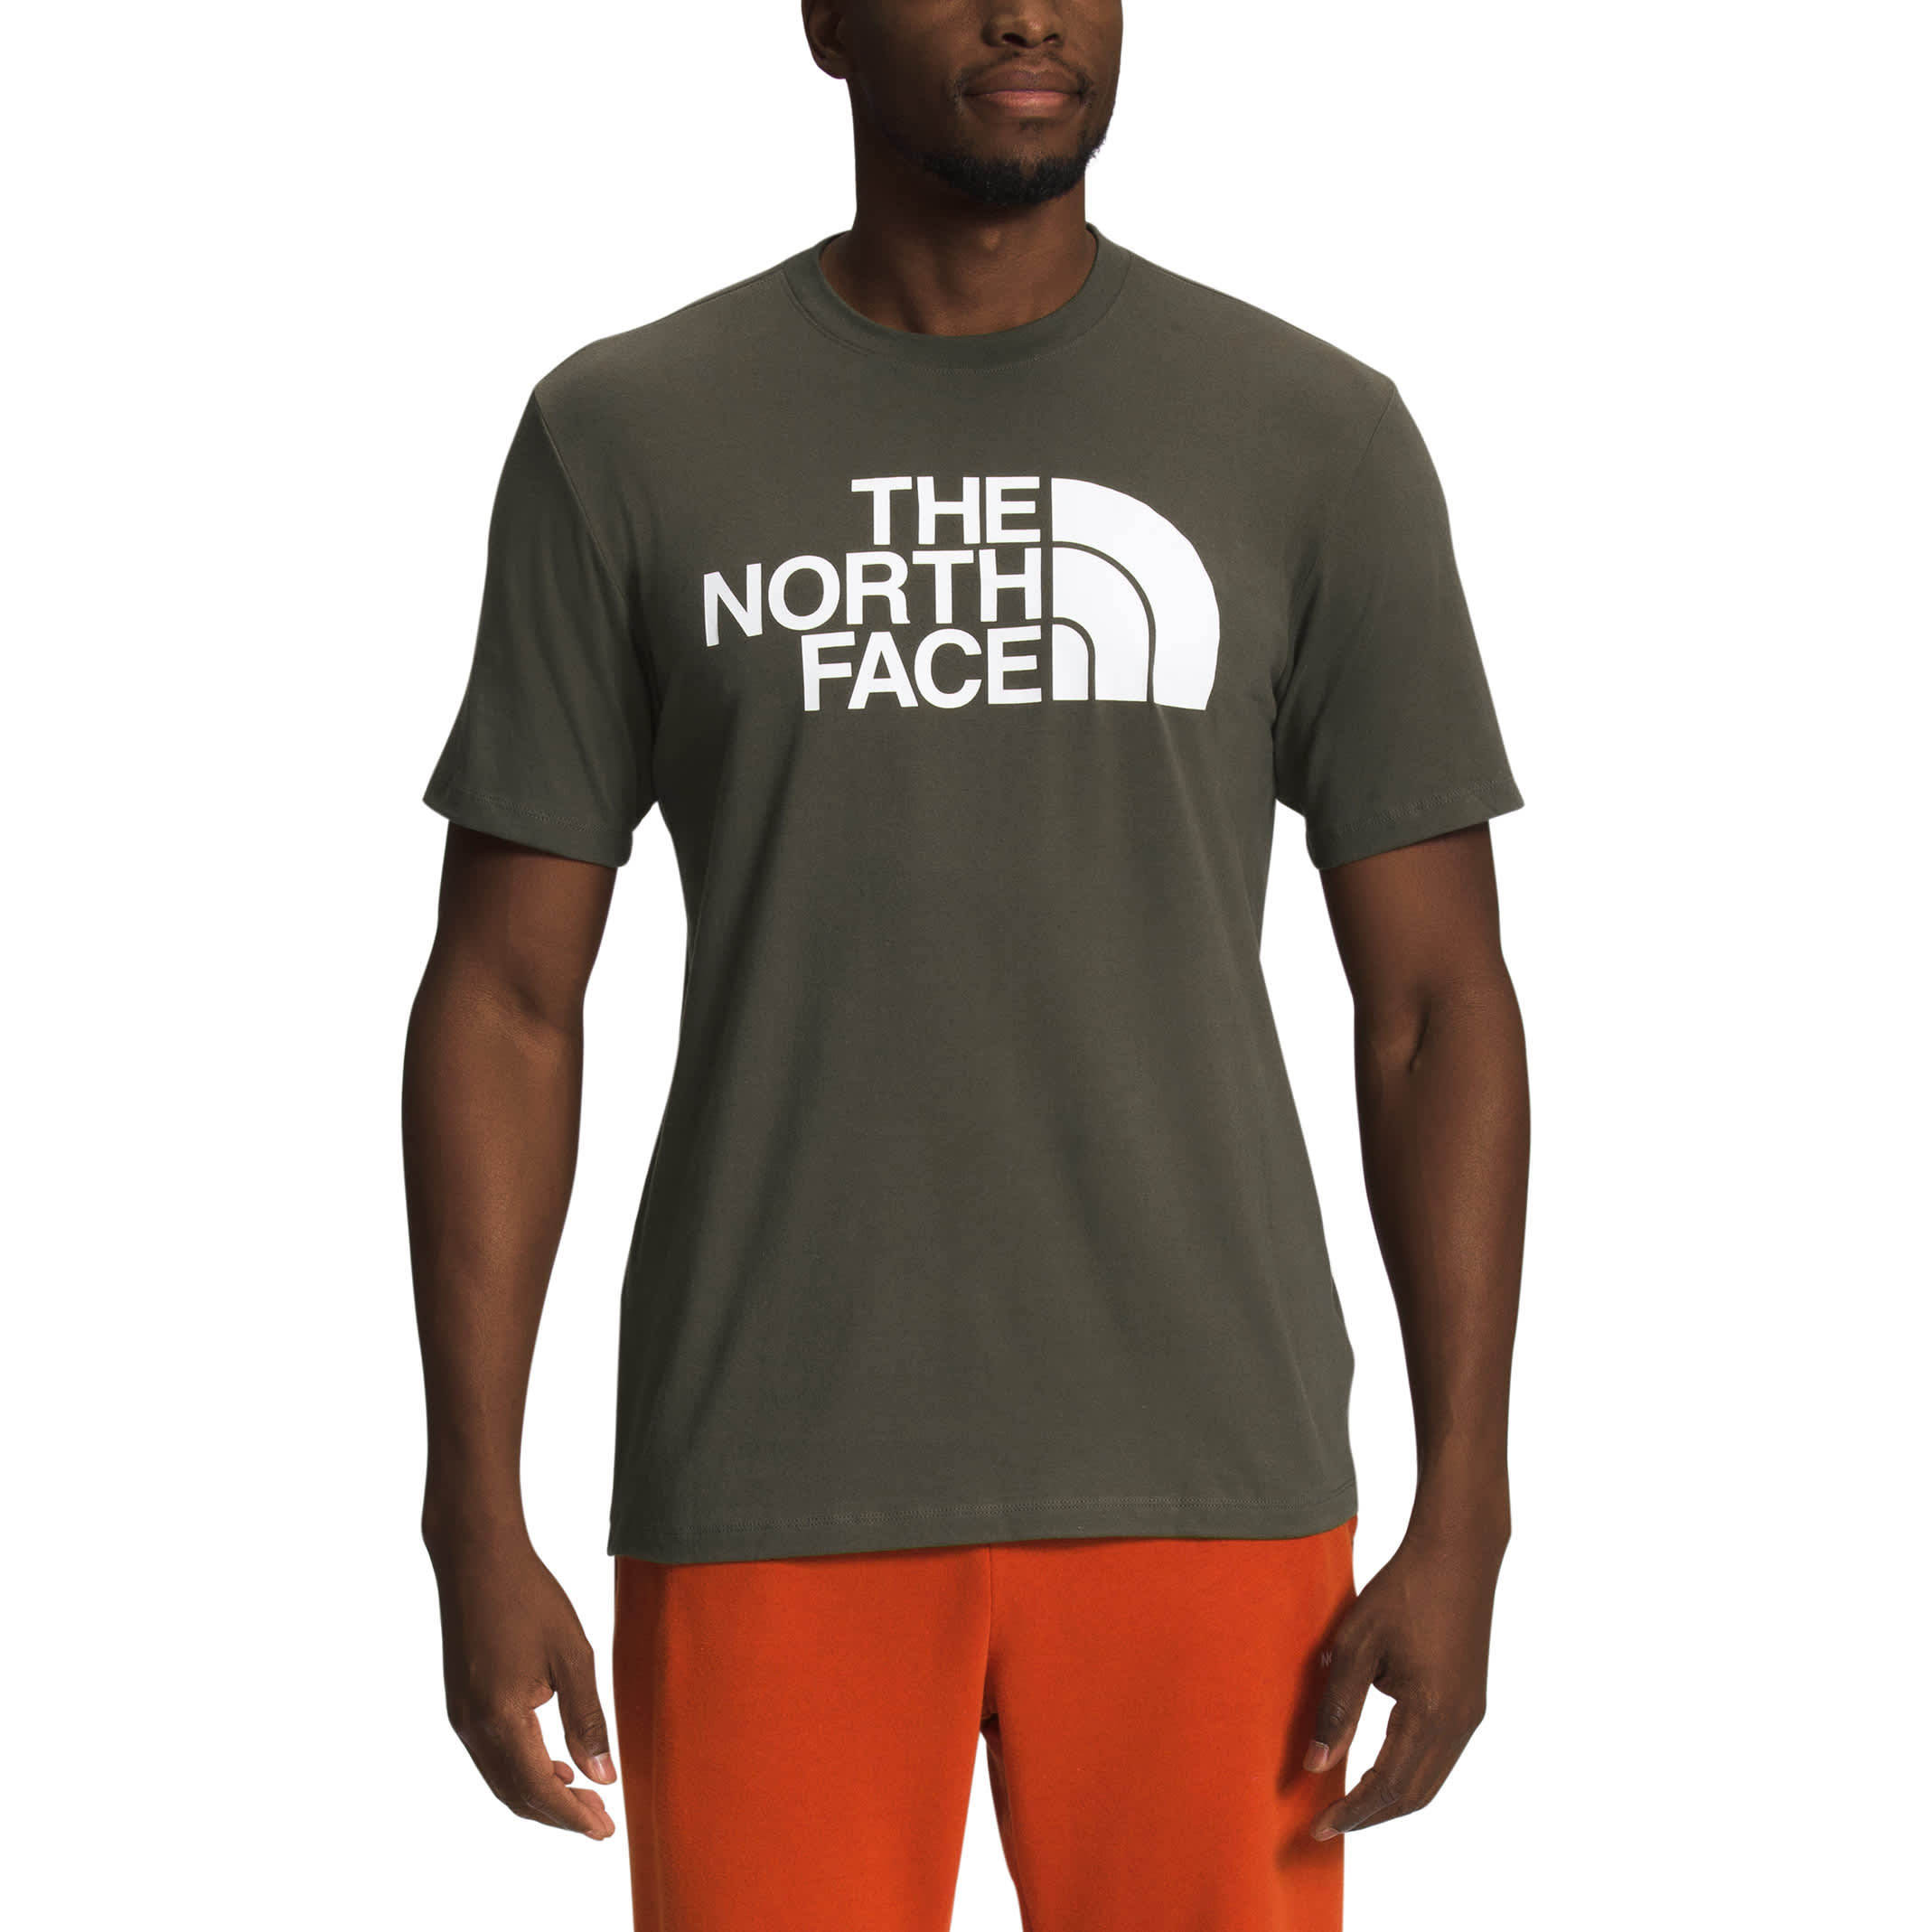 The North Face® Men’s Half Dome Short-Sleeve T-Shirt